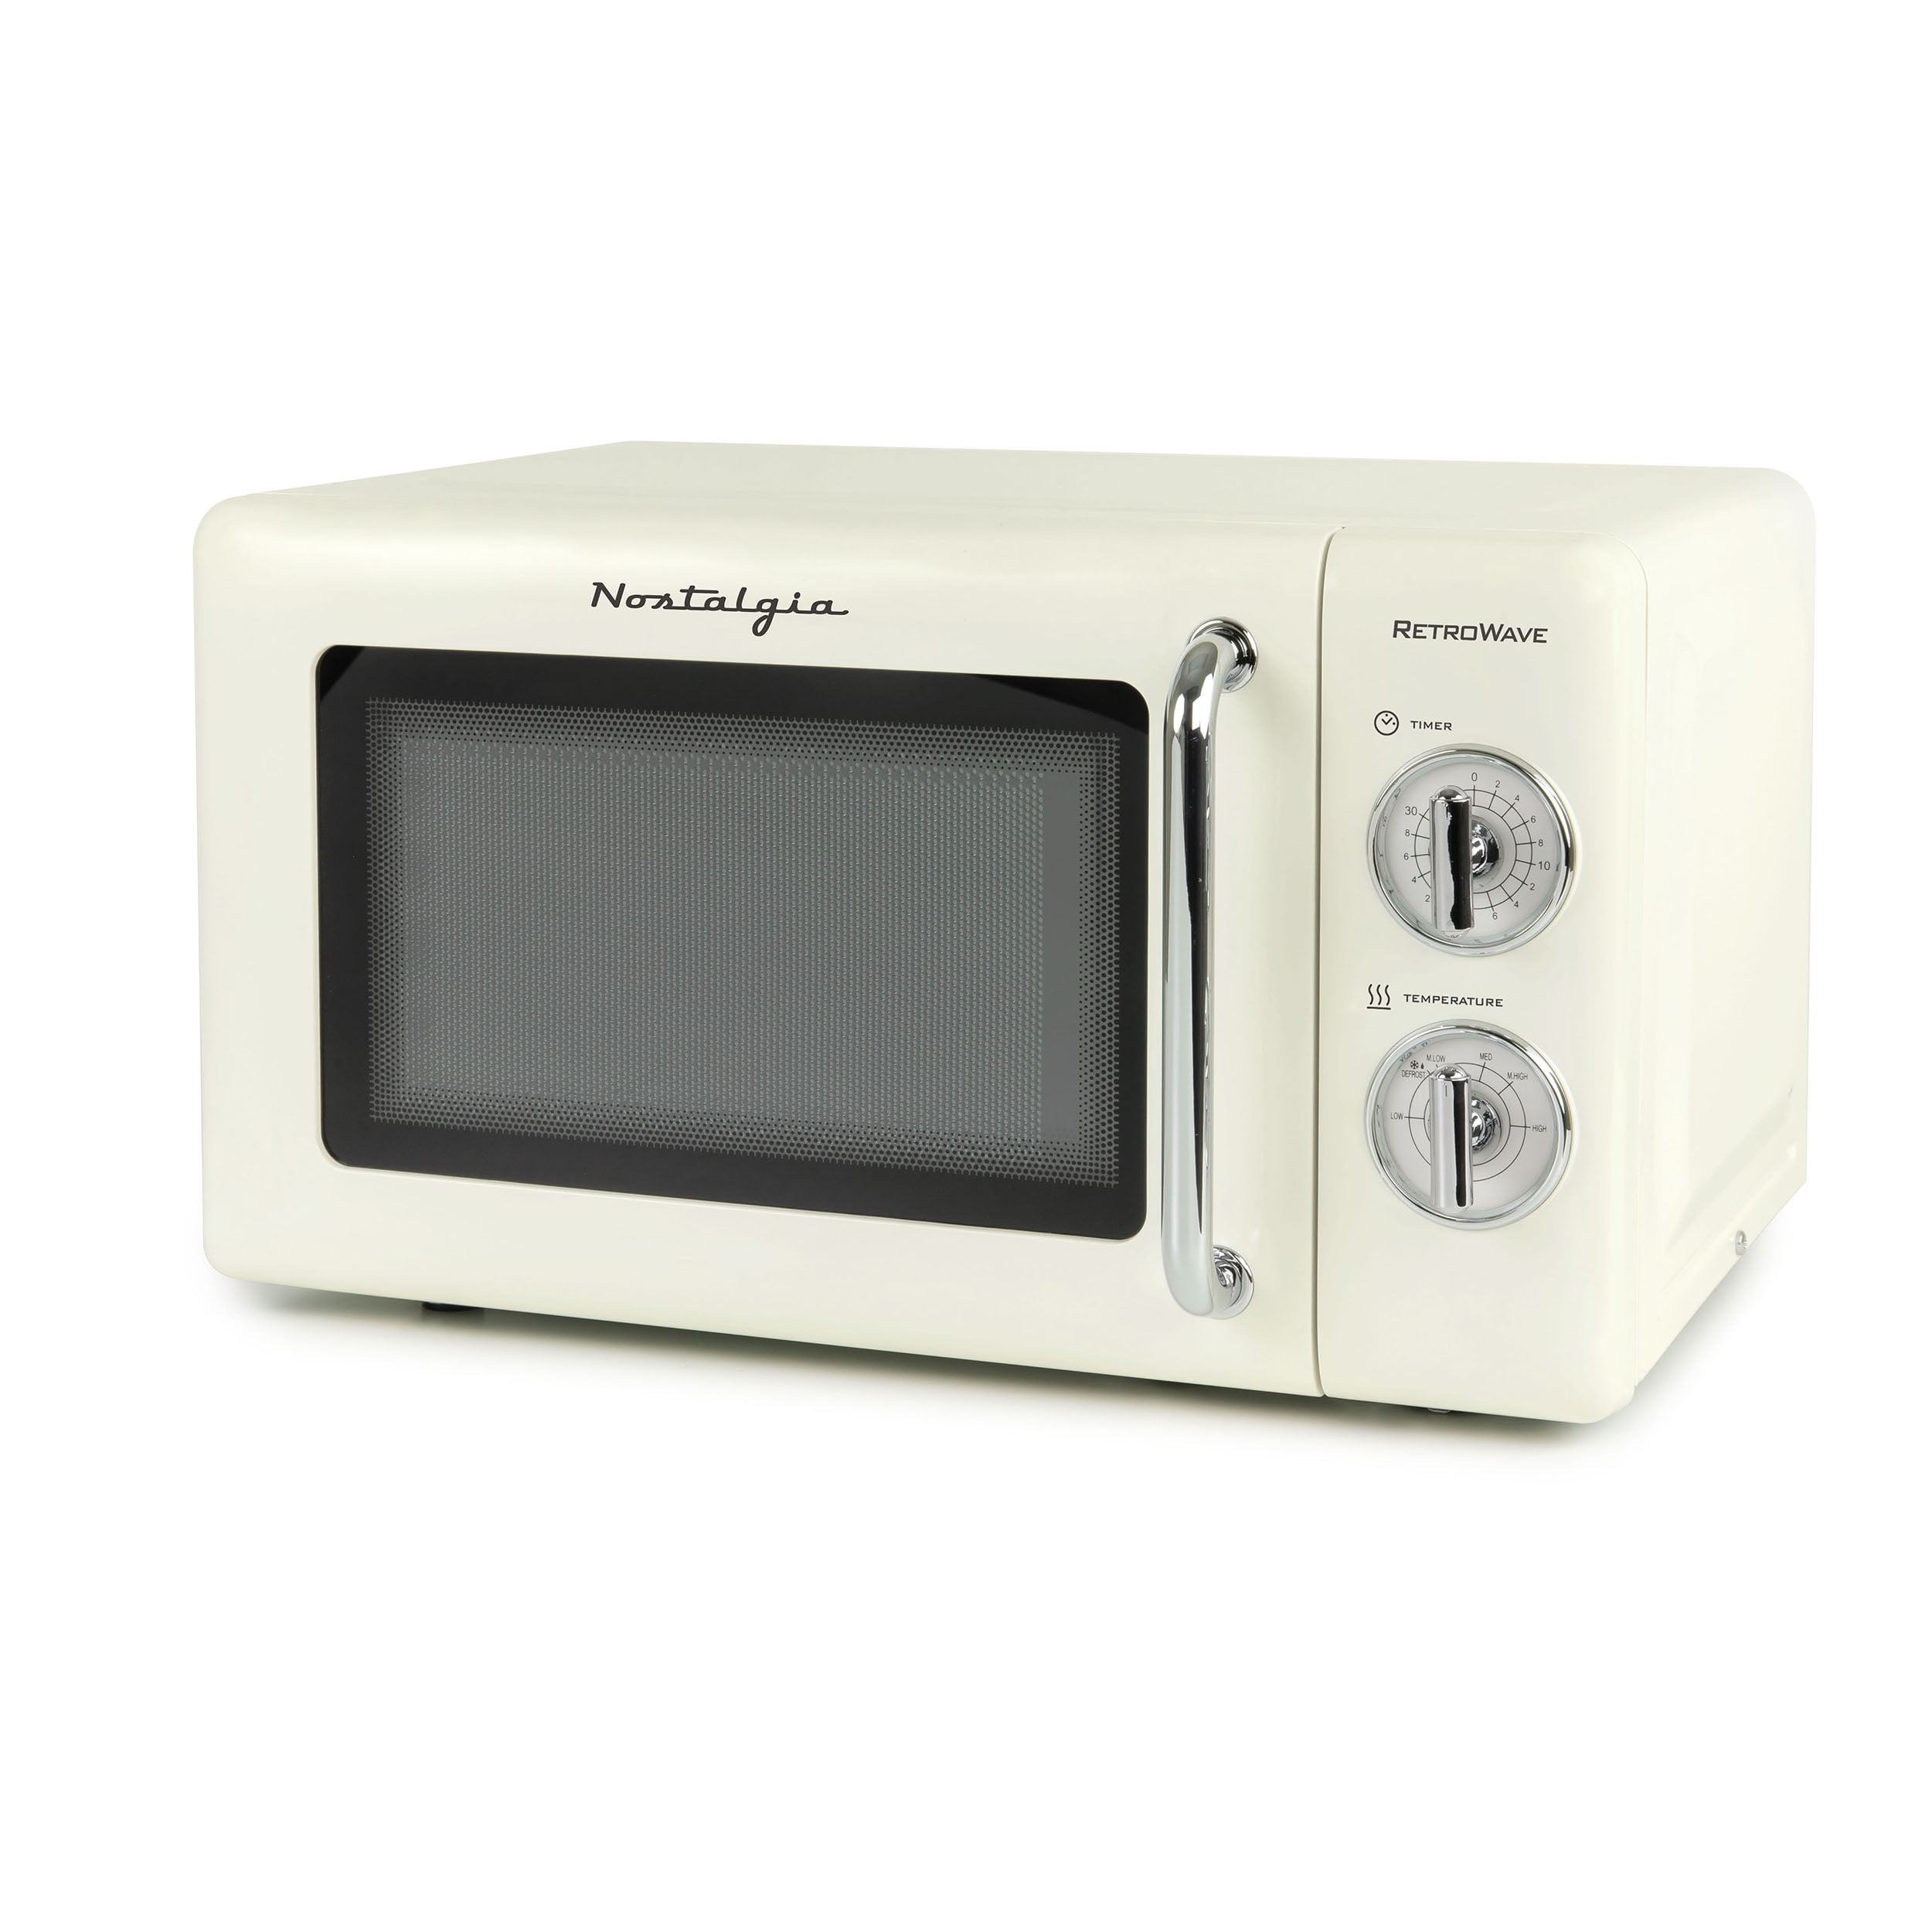 Nostalgia Clmo7wh Classic Retro 0.7 Cu. ft. 700-Watt Countertop Microwave Oven with LED Display, White